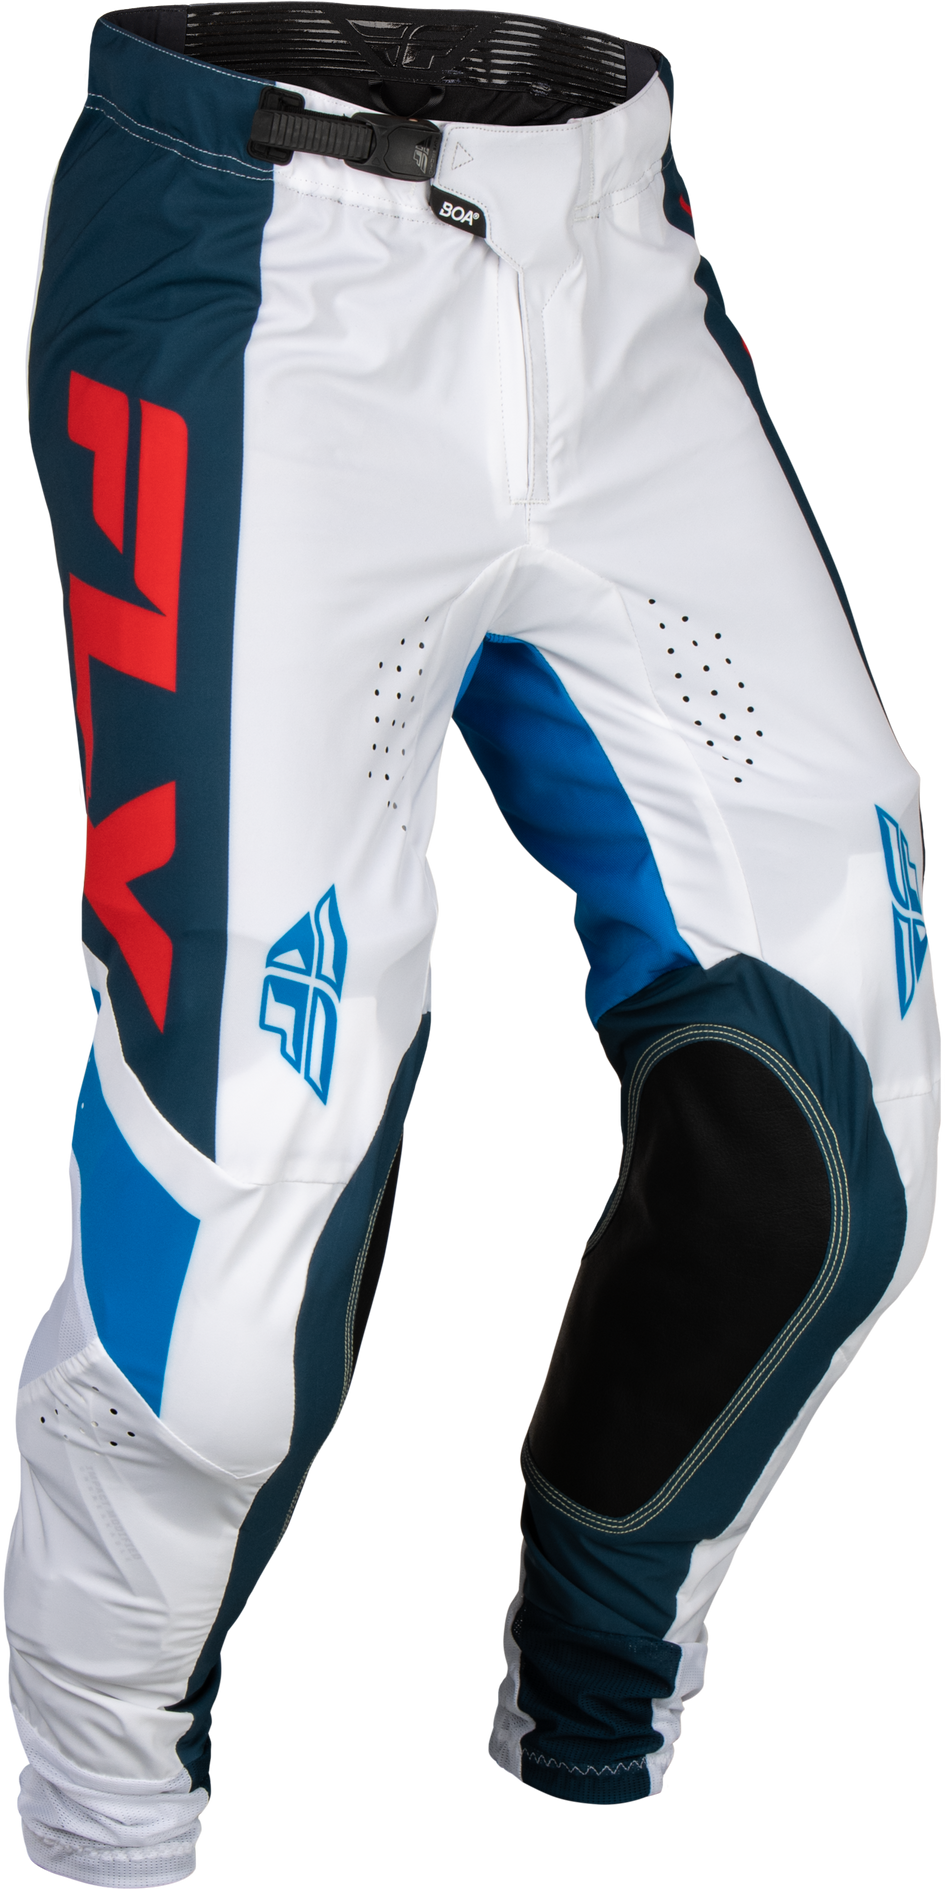 FLY RACING Lite Pants Red/White/Navy Sz 32 377-73332